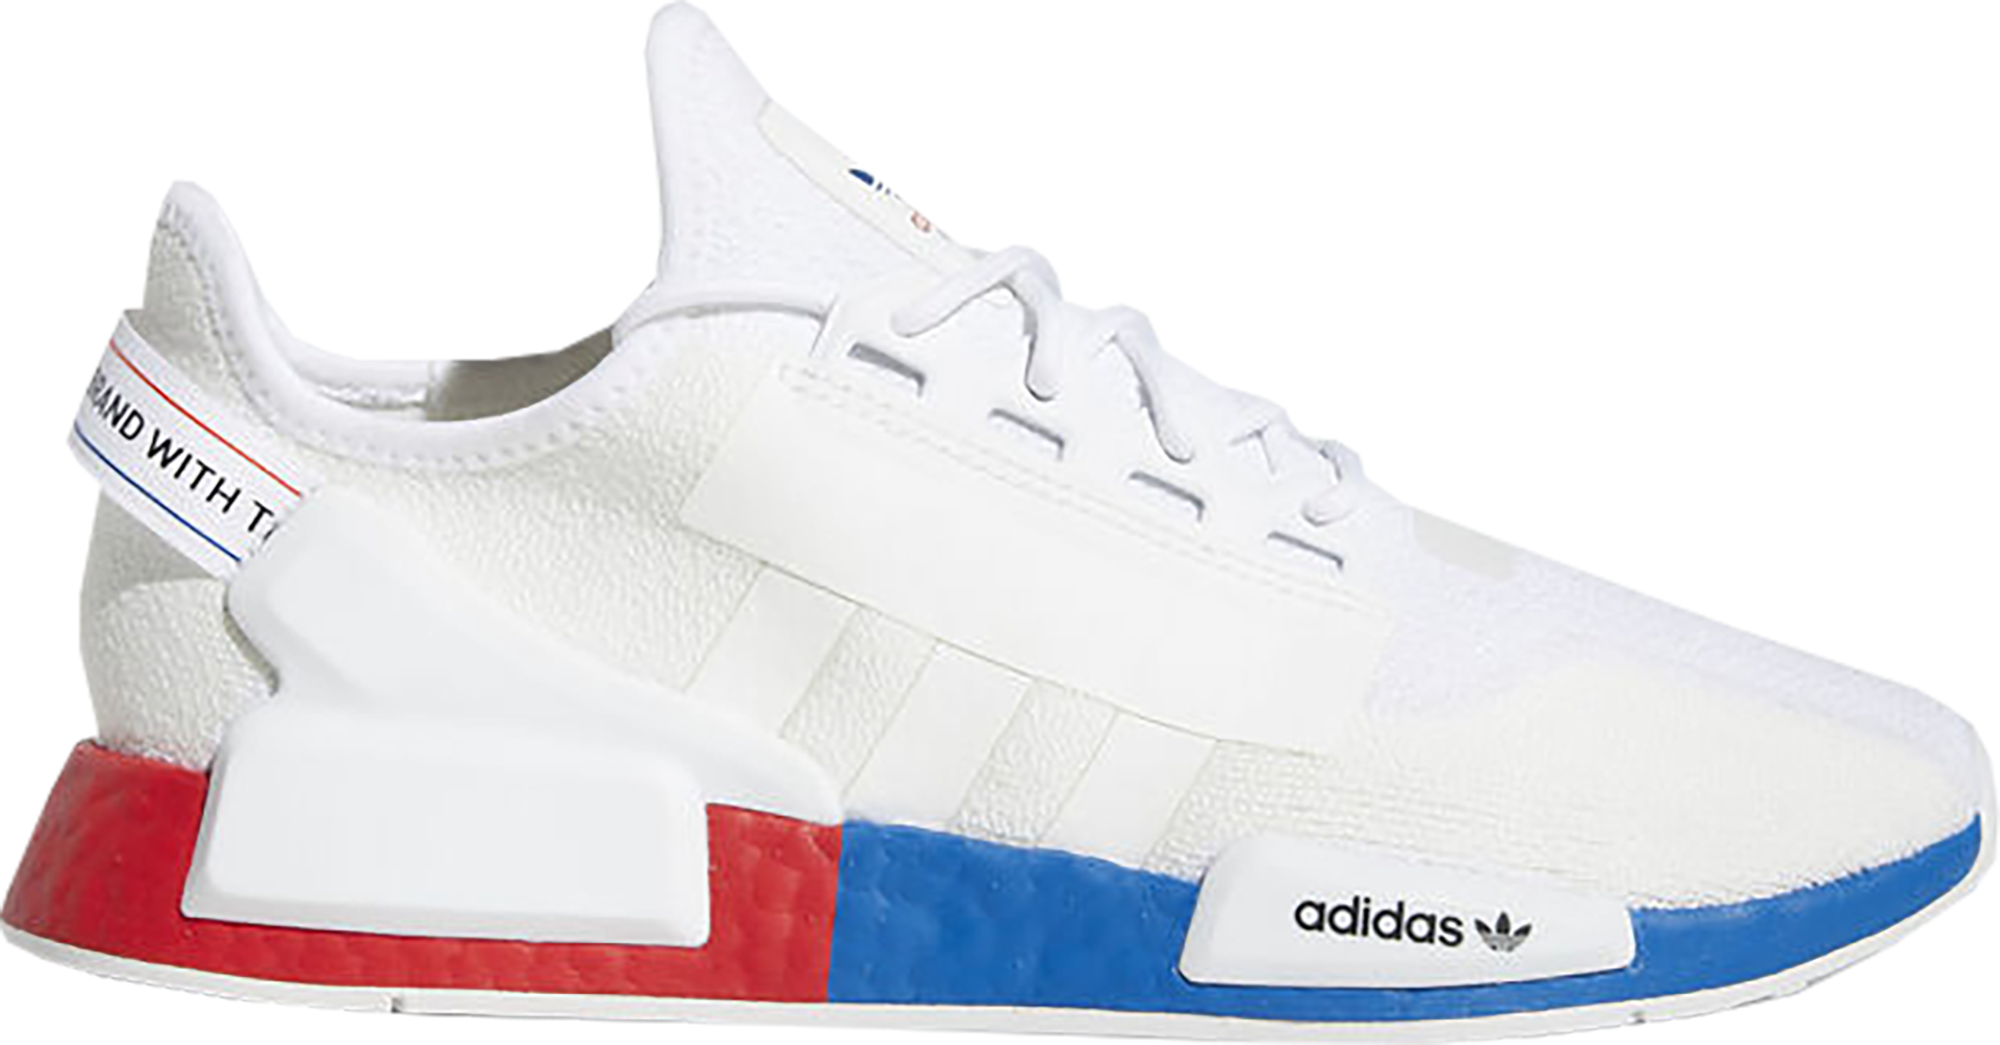 adidas nmd r1 blue and red